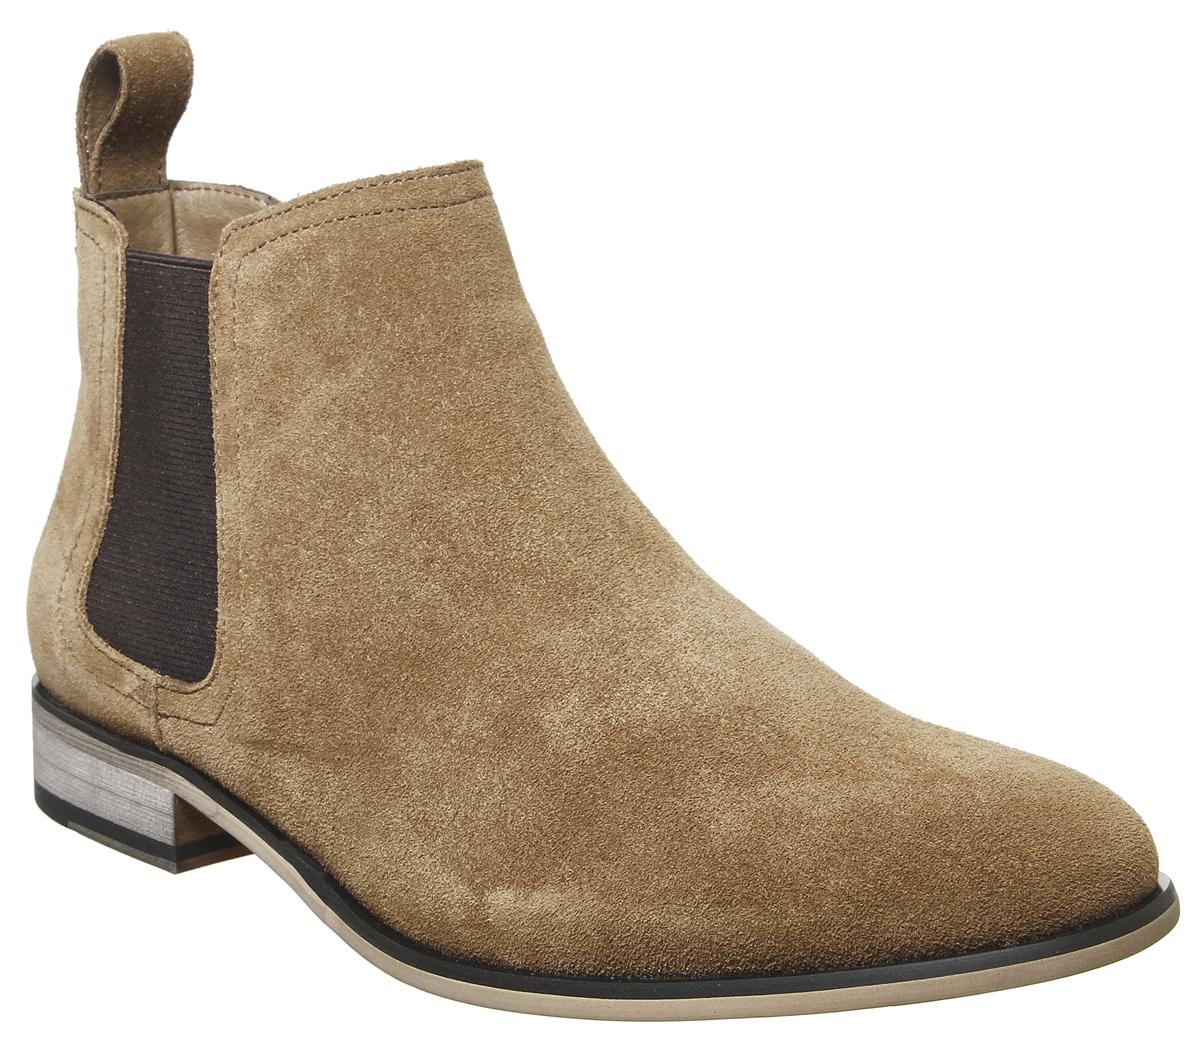 Office Barkley Chelsea Boots Tan Suede 